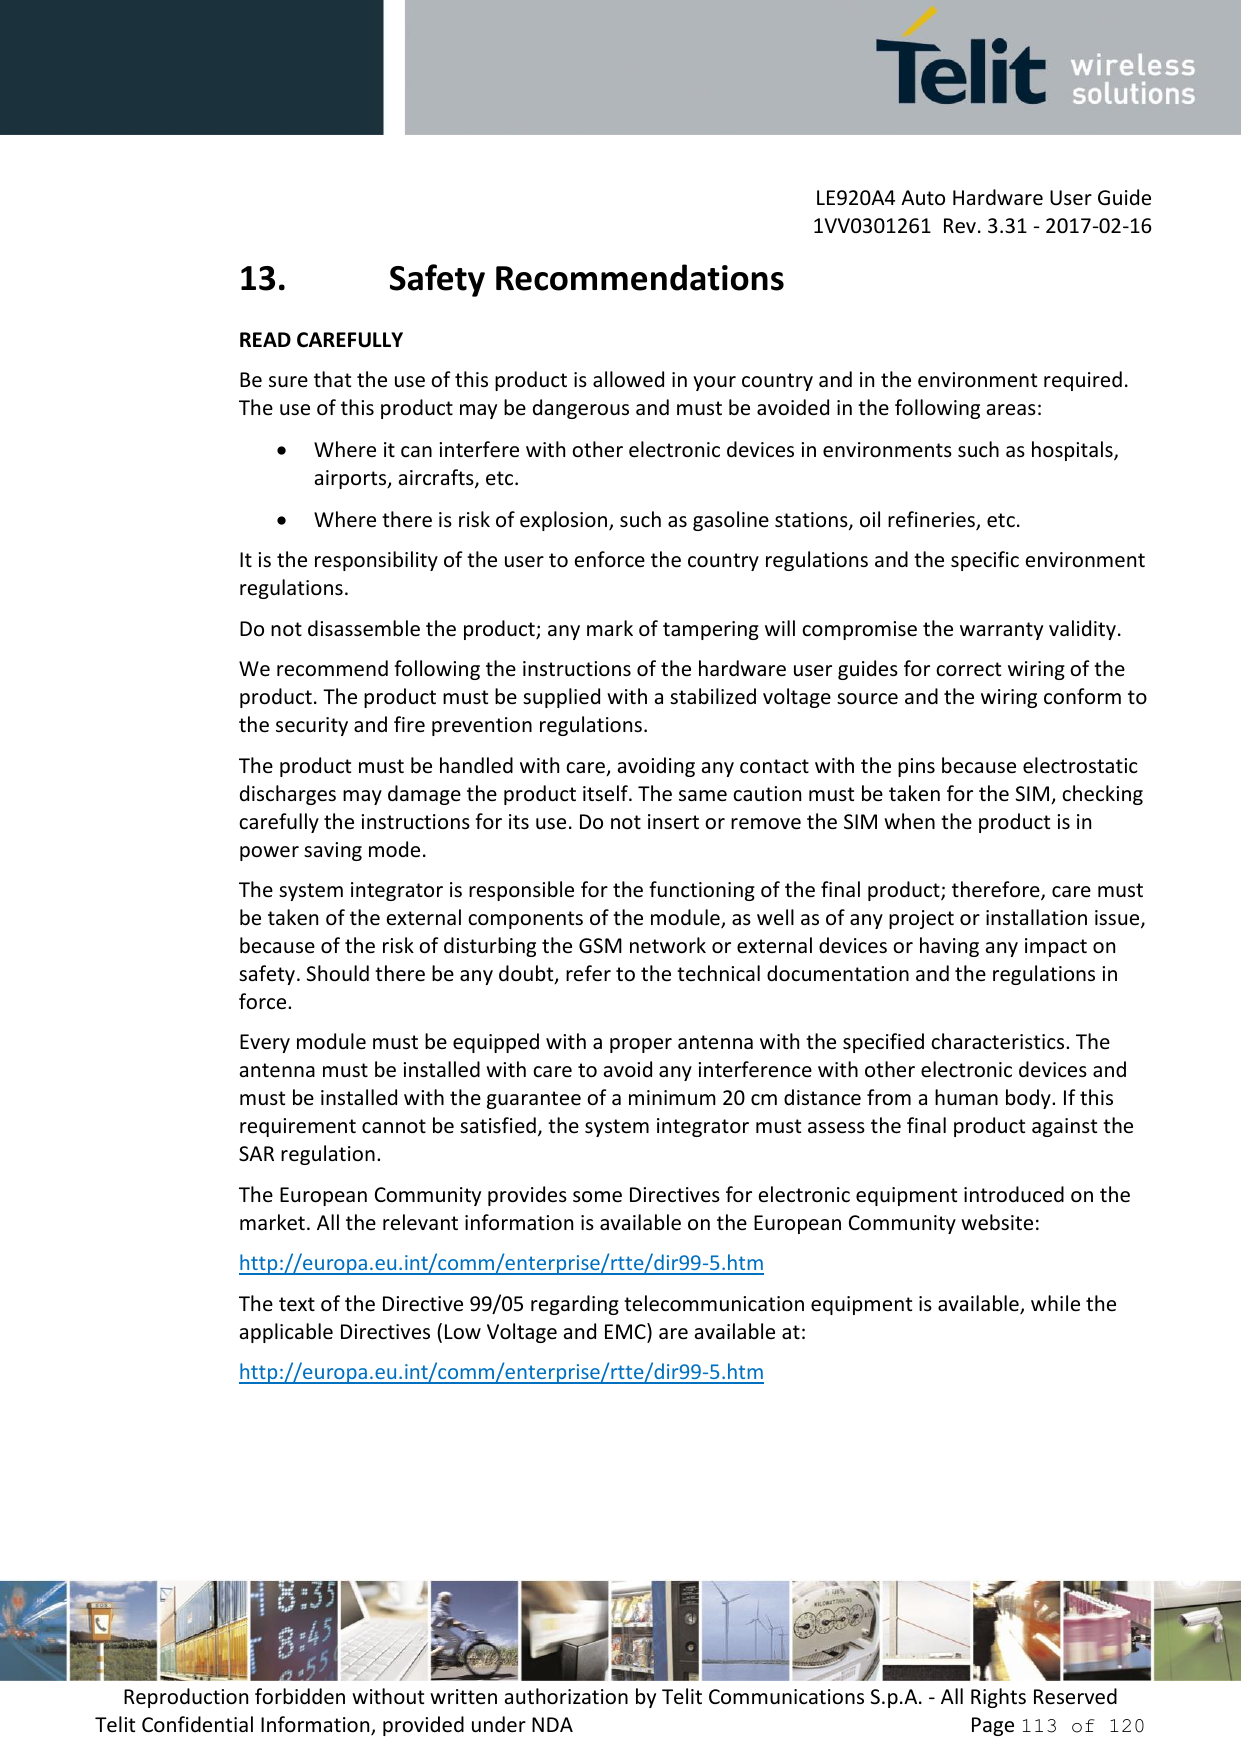         LE920A4 Auto Hardware User Guide     1VV0301261  Rev. 3.31 - 2017-02-16 Reproduction forbidden without written authorization by Telit Communications S.p.A. - All Rights Reserved Telit Confidential Information, provided under NDA                 Page 113 of 120 13. Safety Recommendations READ CAREFULLY Be sure that the use of this product is allowed in your country and in the environment required. The use of this product may be dangerous and must be avoided in the following areas:  Where it can interfere with other electronic devices in environments such as hospitals, airports, aircrafts, etc.  Where there is risk of explosion, such as gasoline stations, oil refineries, etc.  It is the responsibility of the user to enforce the country regulations and the specific environment regulations. Do not disassemble the product; any mark of tampering will compromise the warranty validity. We recommend following the instructions of the hardware user guides for correct wiring of the product. The product must be supplied with a stabilized voltage source and the wiring conform to the security and fire prevention regulations. The product must be handled with care, avoiding any contact with the pins because electrostatic discharges may damage the product itself. The same caution must be taken for the SIM, checking carefully the instructions for its use. Do not insert or remove the SIM when the product is in power saving mode. The system integrator is responsible for the functioning of the final product; therefore, care must be taken of the external components of the module, as well as of any project or installation issue, because of the risk of disturbing the GSM network or external devices or having any impact on safety. Should there be any doubt, refer to the technical documentation and the regulations in force. Every module must be equipped with a proper antenna with the specified characteristics. The antenna must be installed with care to avoid any interference with other electronic devices and must be installed with the guarantee of a minimum 20 cm distance from a human body. If this requirement cannot be satisfied, the system integrator must assess the final product against the SAR regulation. The European Community provides some Directives for electronic equipment introduced on the market. All the relevant information is available on the European Community website: http://europa.eu.int/comm/enterprise/rtte/dir99-5.htm The text of the Directive 99/05 regarding telecommunication equipment is available, while the applicable Directives (Low Voltage and EMC) are available at: http://europa.eu.int/comm/enterprise/rtte/dir99-5.htm  